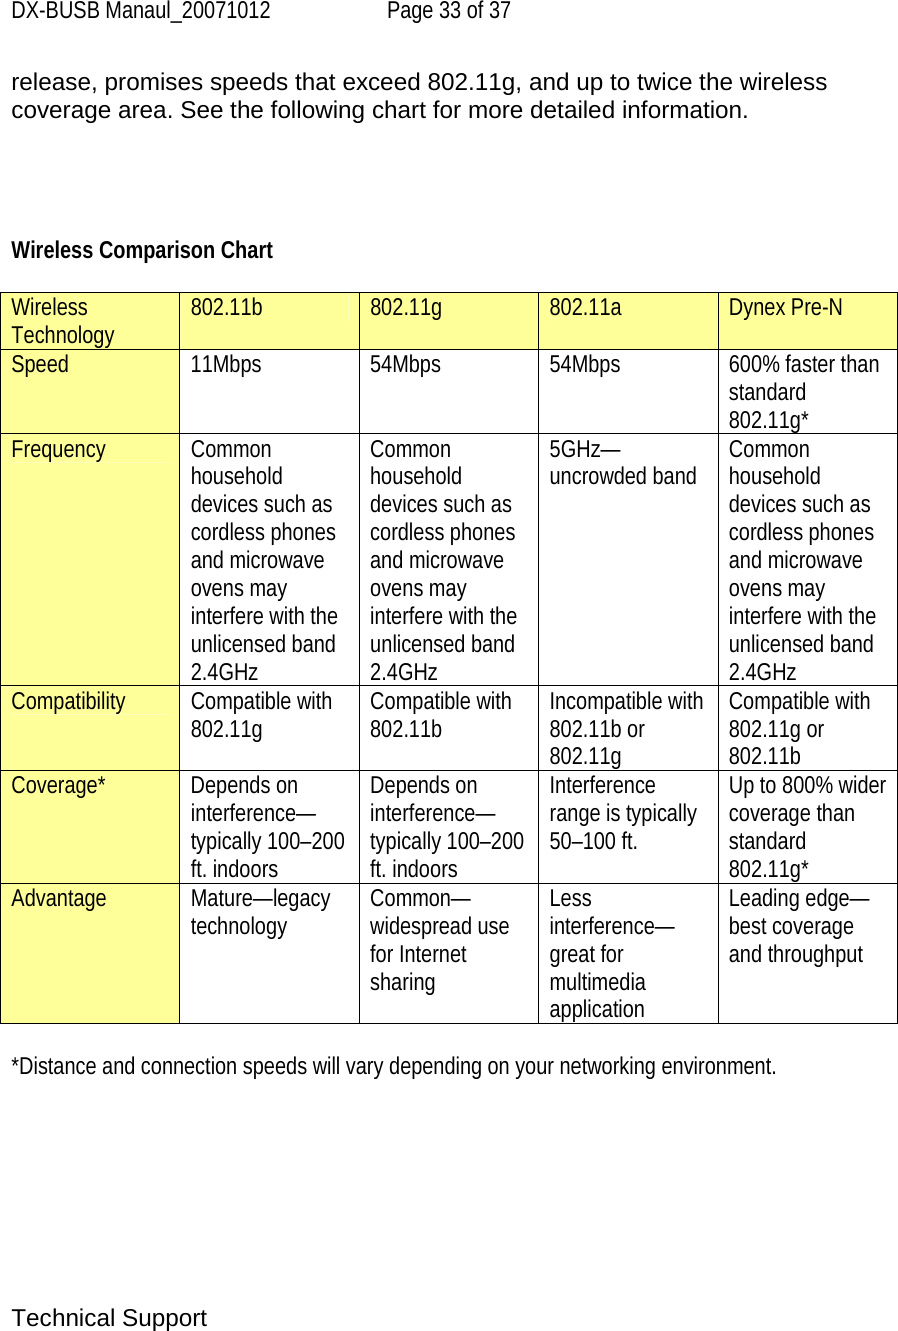 DX-BUSB Manaul_20071012  Page 33 of 37 release, promises speeds that exceed 802.11g, and up to twice the wireless coverage area. See the following chart for more detailed information.     Wireless Comparison Chart  Wireless Technology  802.11b  802.11g  802.11a  Dynex Pre-N Speed 11Mbps 54Mbps 54Mbps 600% faster than standard 802.11g*  Frequency Common household devices such as cordless phones and microwave ovens may interfere with the unlicensed band 2.4GHz Common household devices such as cordless phones and microwave ovens may interfere with the unlicensed band 2.4GHz 5GHz— uncrowded band  Common household devices such as cordless phones and microwave ovens may interfere with the unlicensed band 2.4GHz Compatibility Compatible with 802.11g  Compatible with 802.11b  Incompatible with 802.11b or 802.11g Compatible with 802.11g or 802.11b Coverage* Depends on interference—typically 100–200 ft. indoors Depends on interference—typically 100–200 ft. indoors Interference range is typically 50–100 ft.  Up to 800% wider coverage than standard 802.11g* Advantage Mature—legacy technology   Common—widespread use for Internet sharing Less interference— great for multimedia application Leading edge— best coverage and throughput  *Distance and connection speeds will vary depending on your networking environment.         Technical Support 